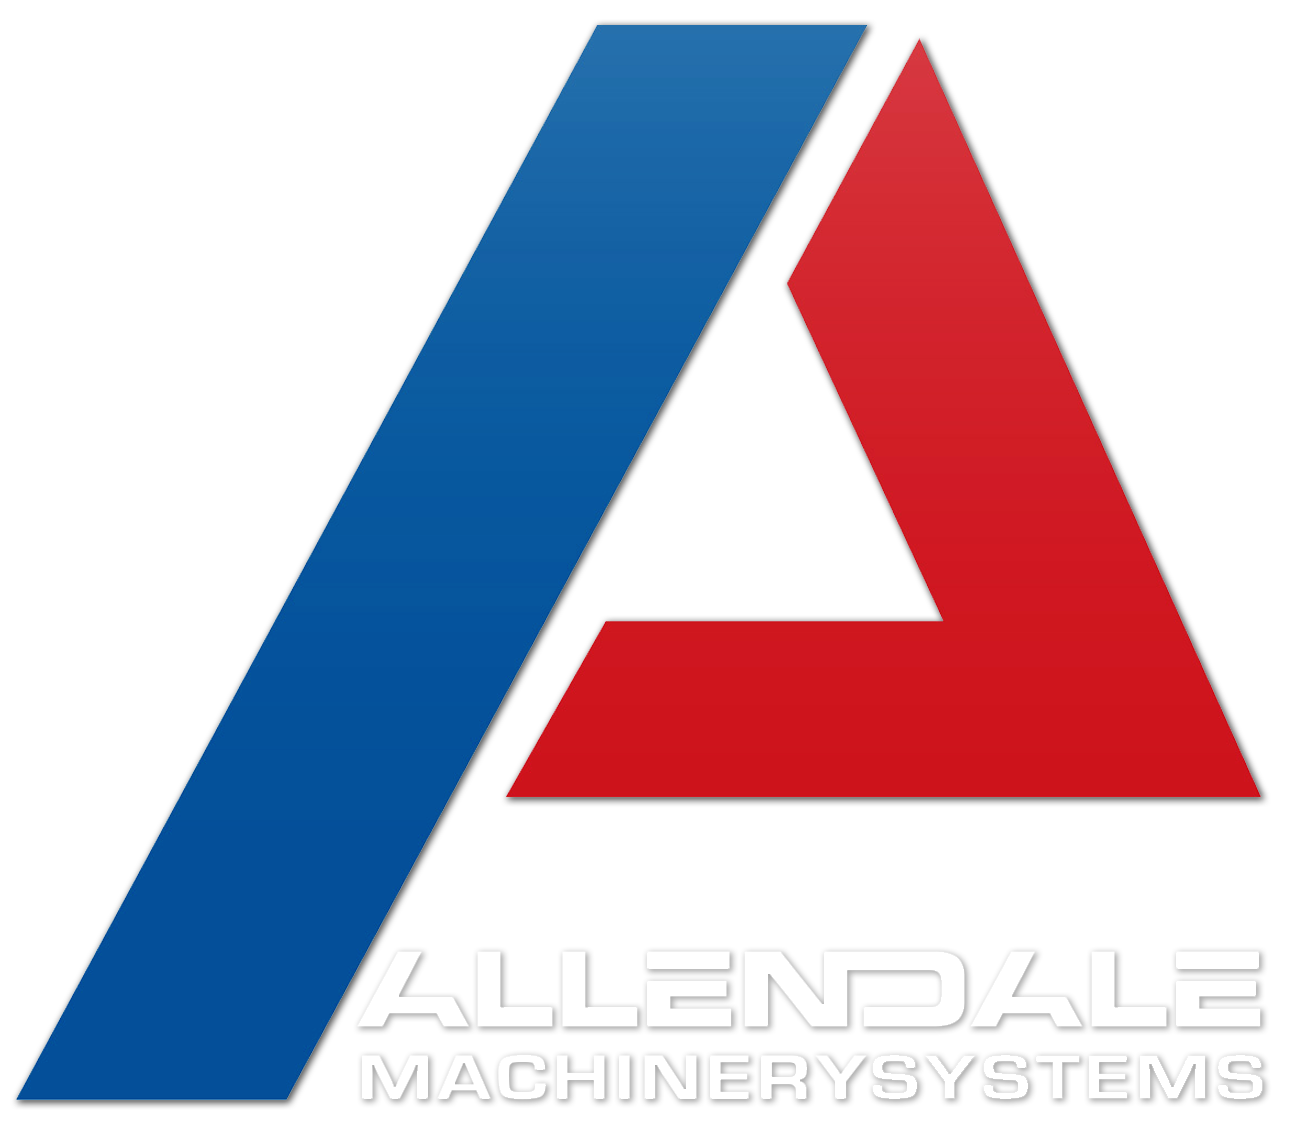 ALLENDALE MACHINERY SYSTEMS